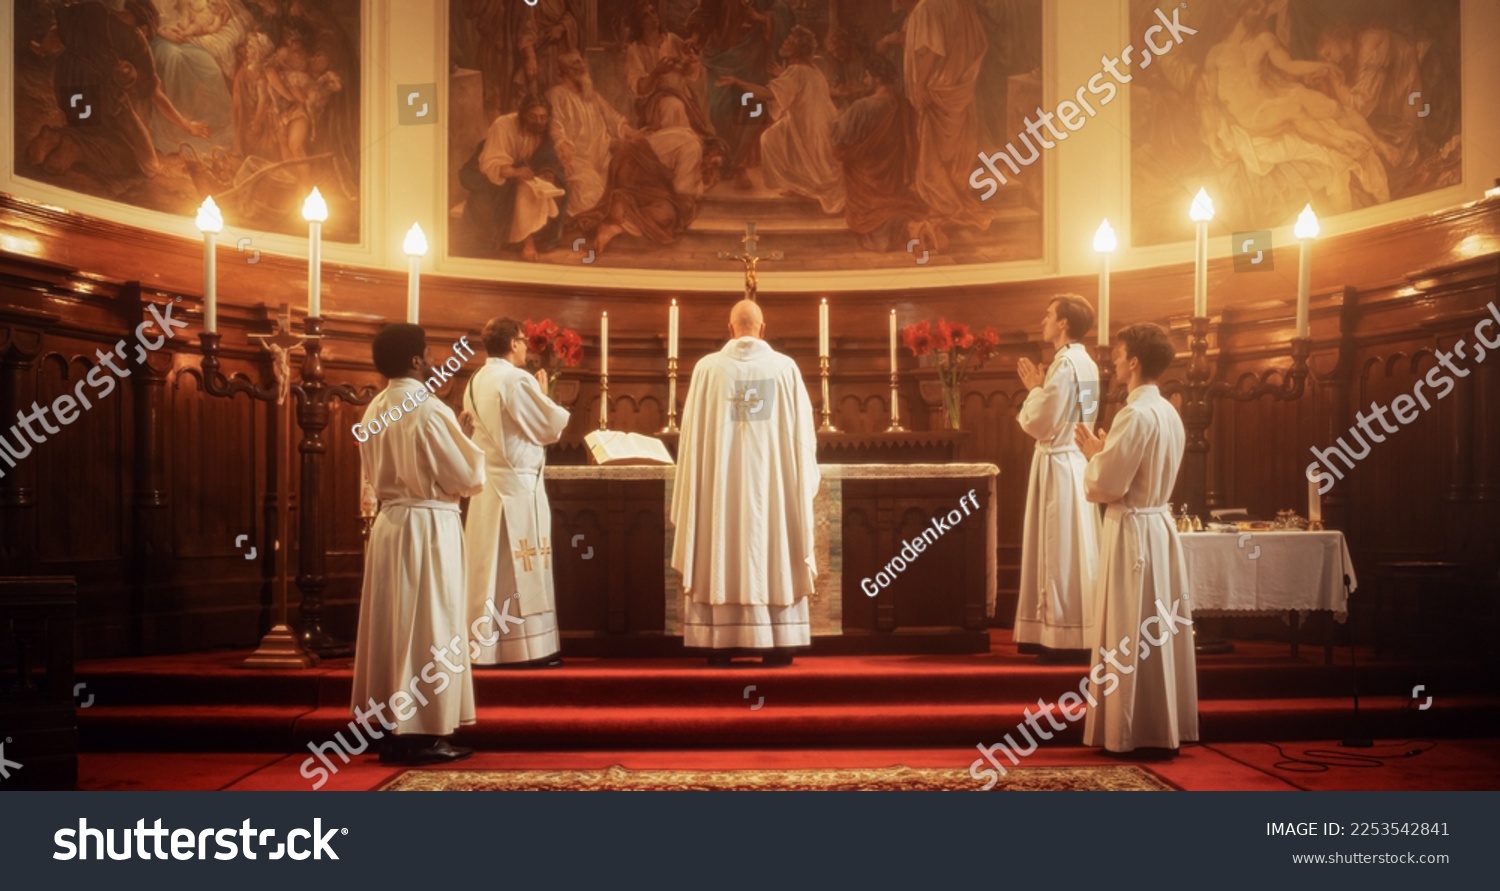 In Grand Old Church at the Altar Ministers Lead The Eucharist, a Sacred Christian Ceremony. Holy Communion, Divine Mass, Lord's Supper. Community Sharing Wisdom and Guidance of the Bible #2253542841